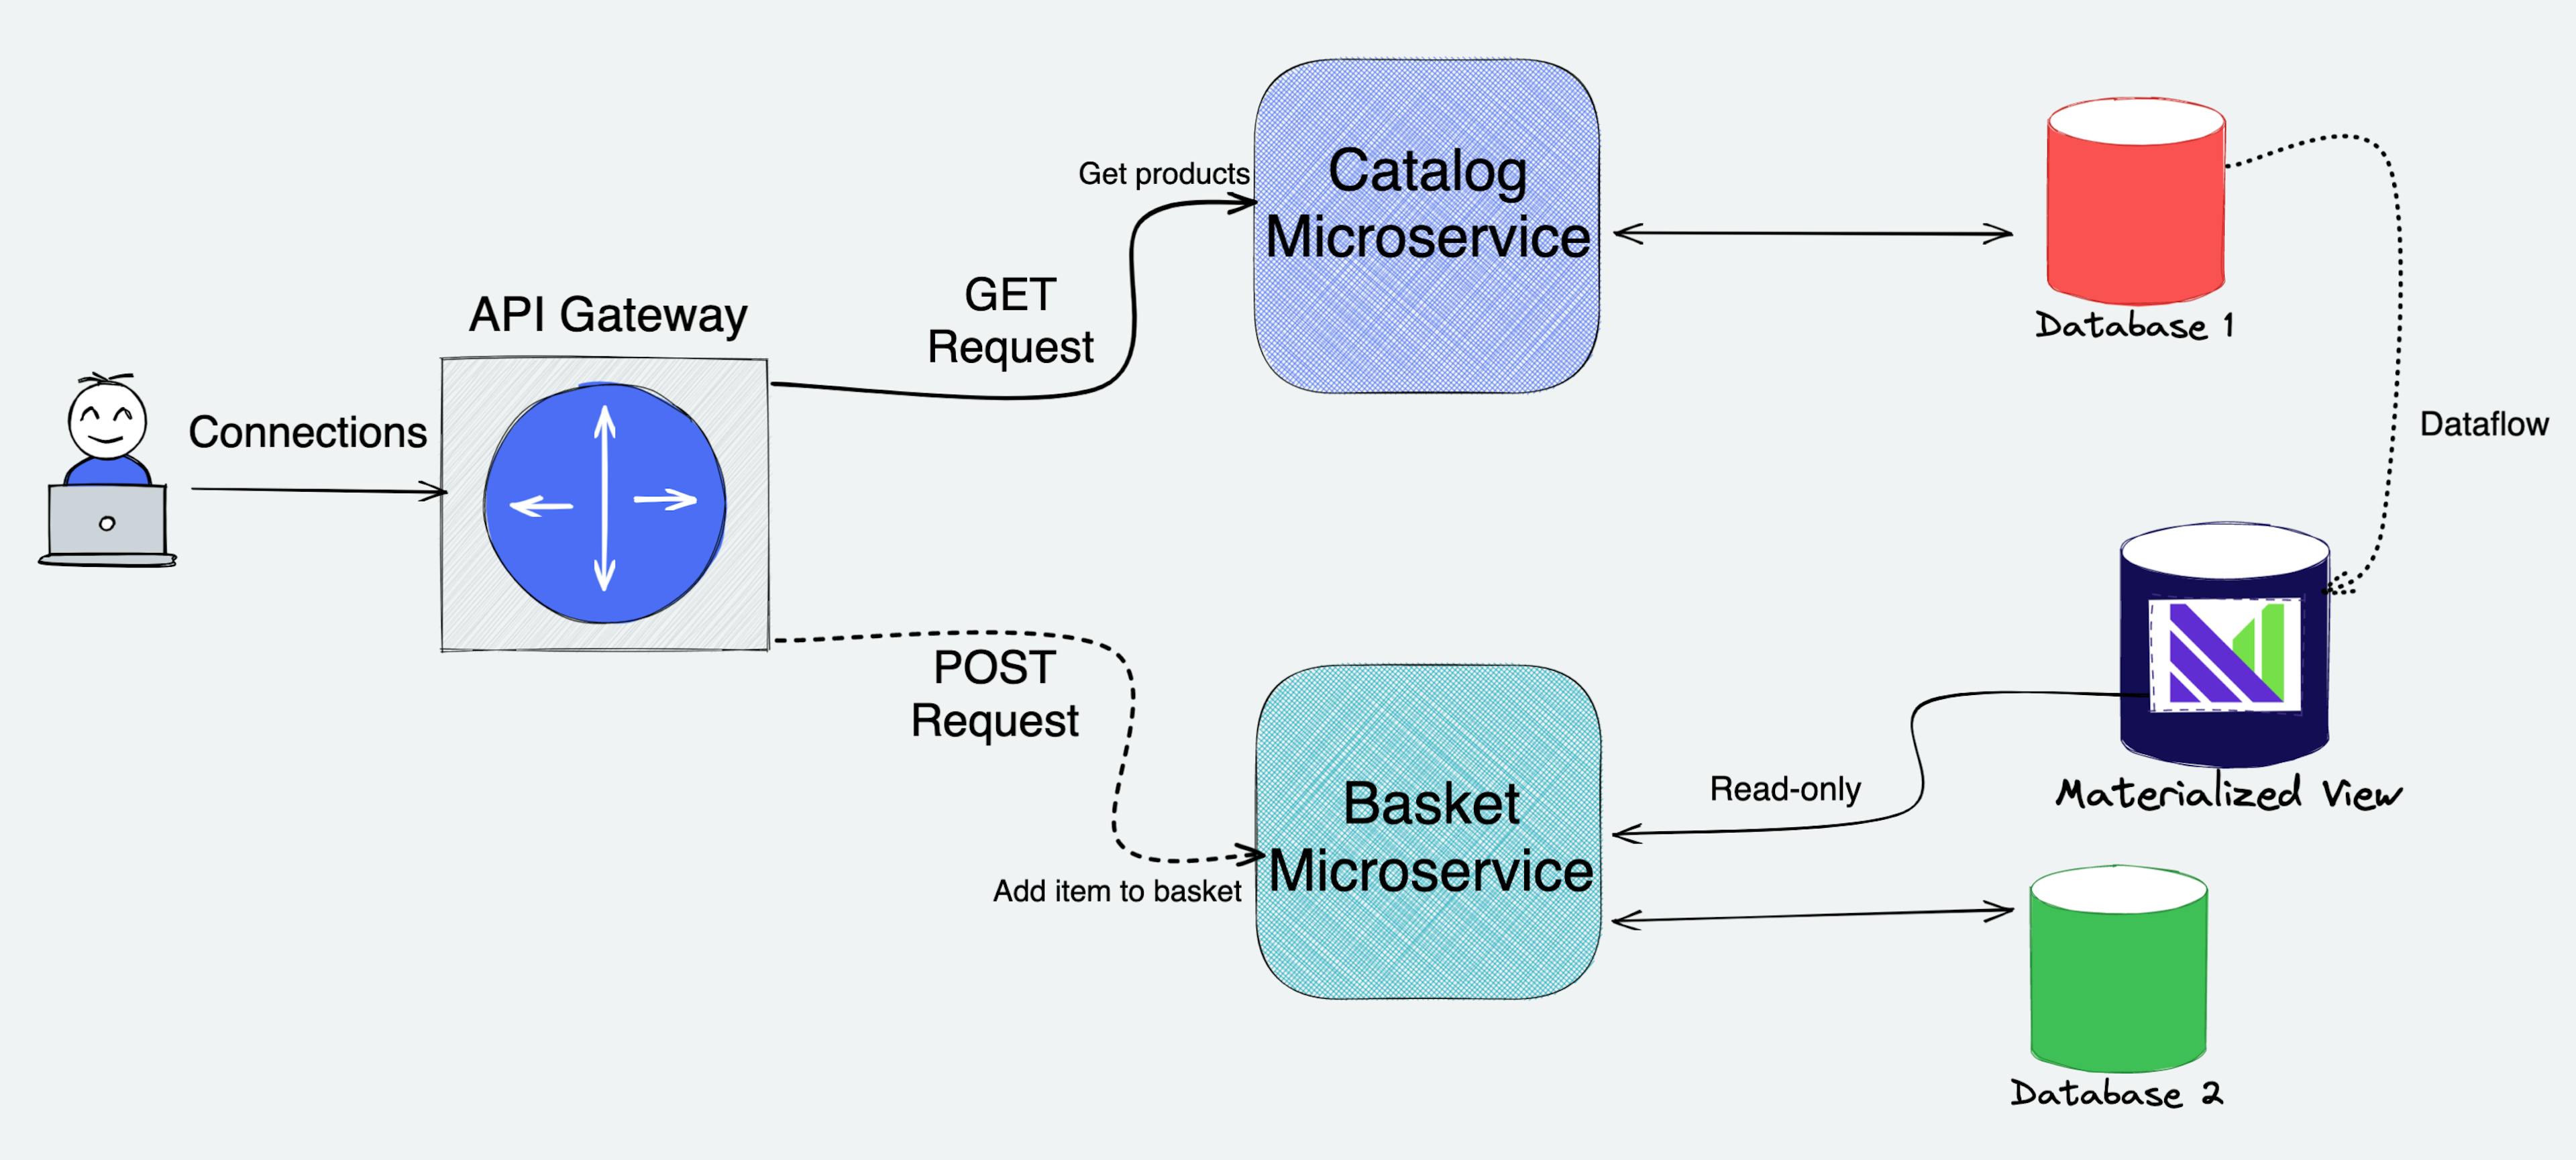 Decoupled Microservices Architecture with Materialize